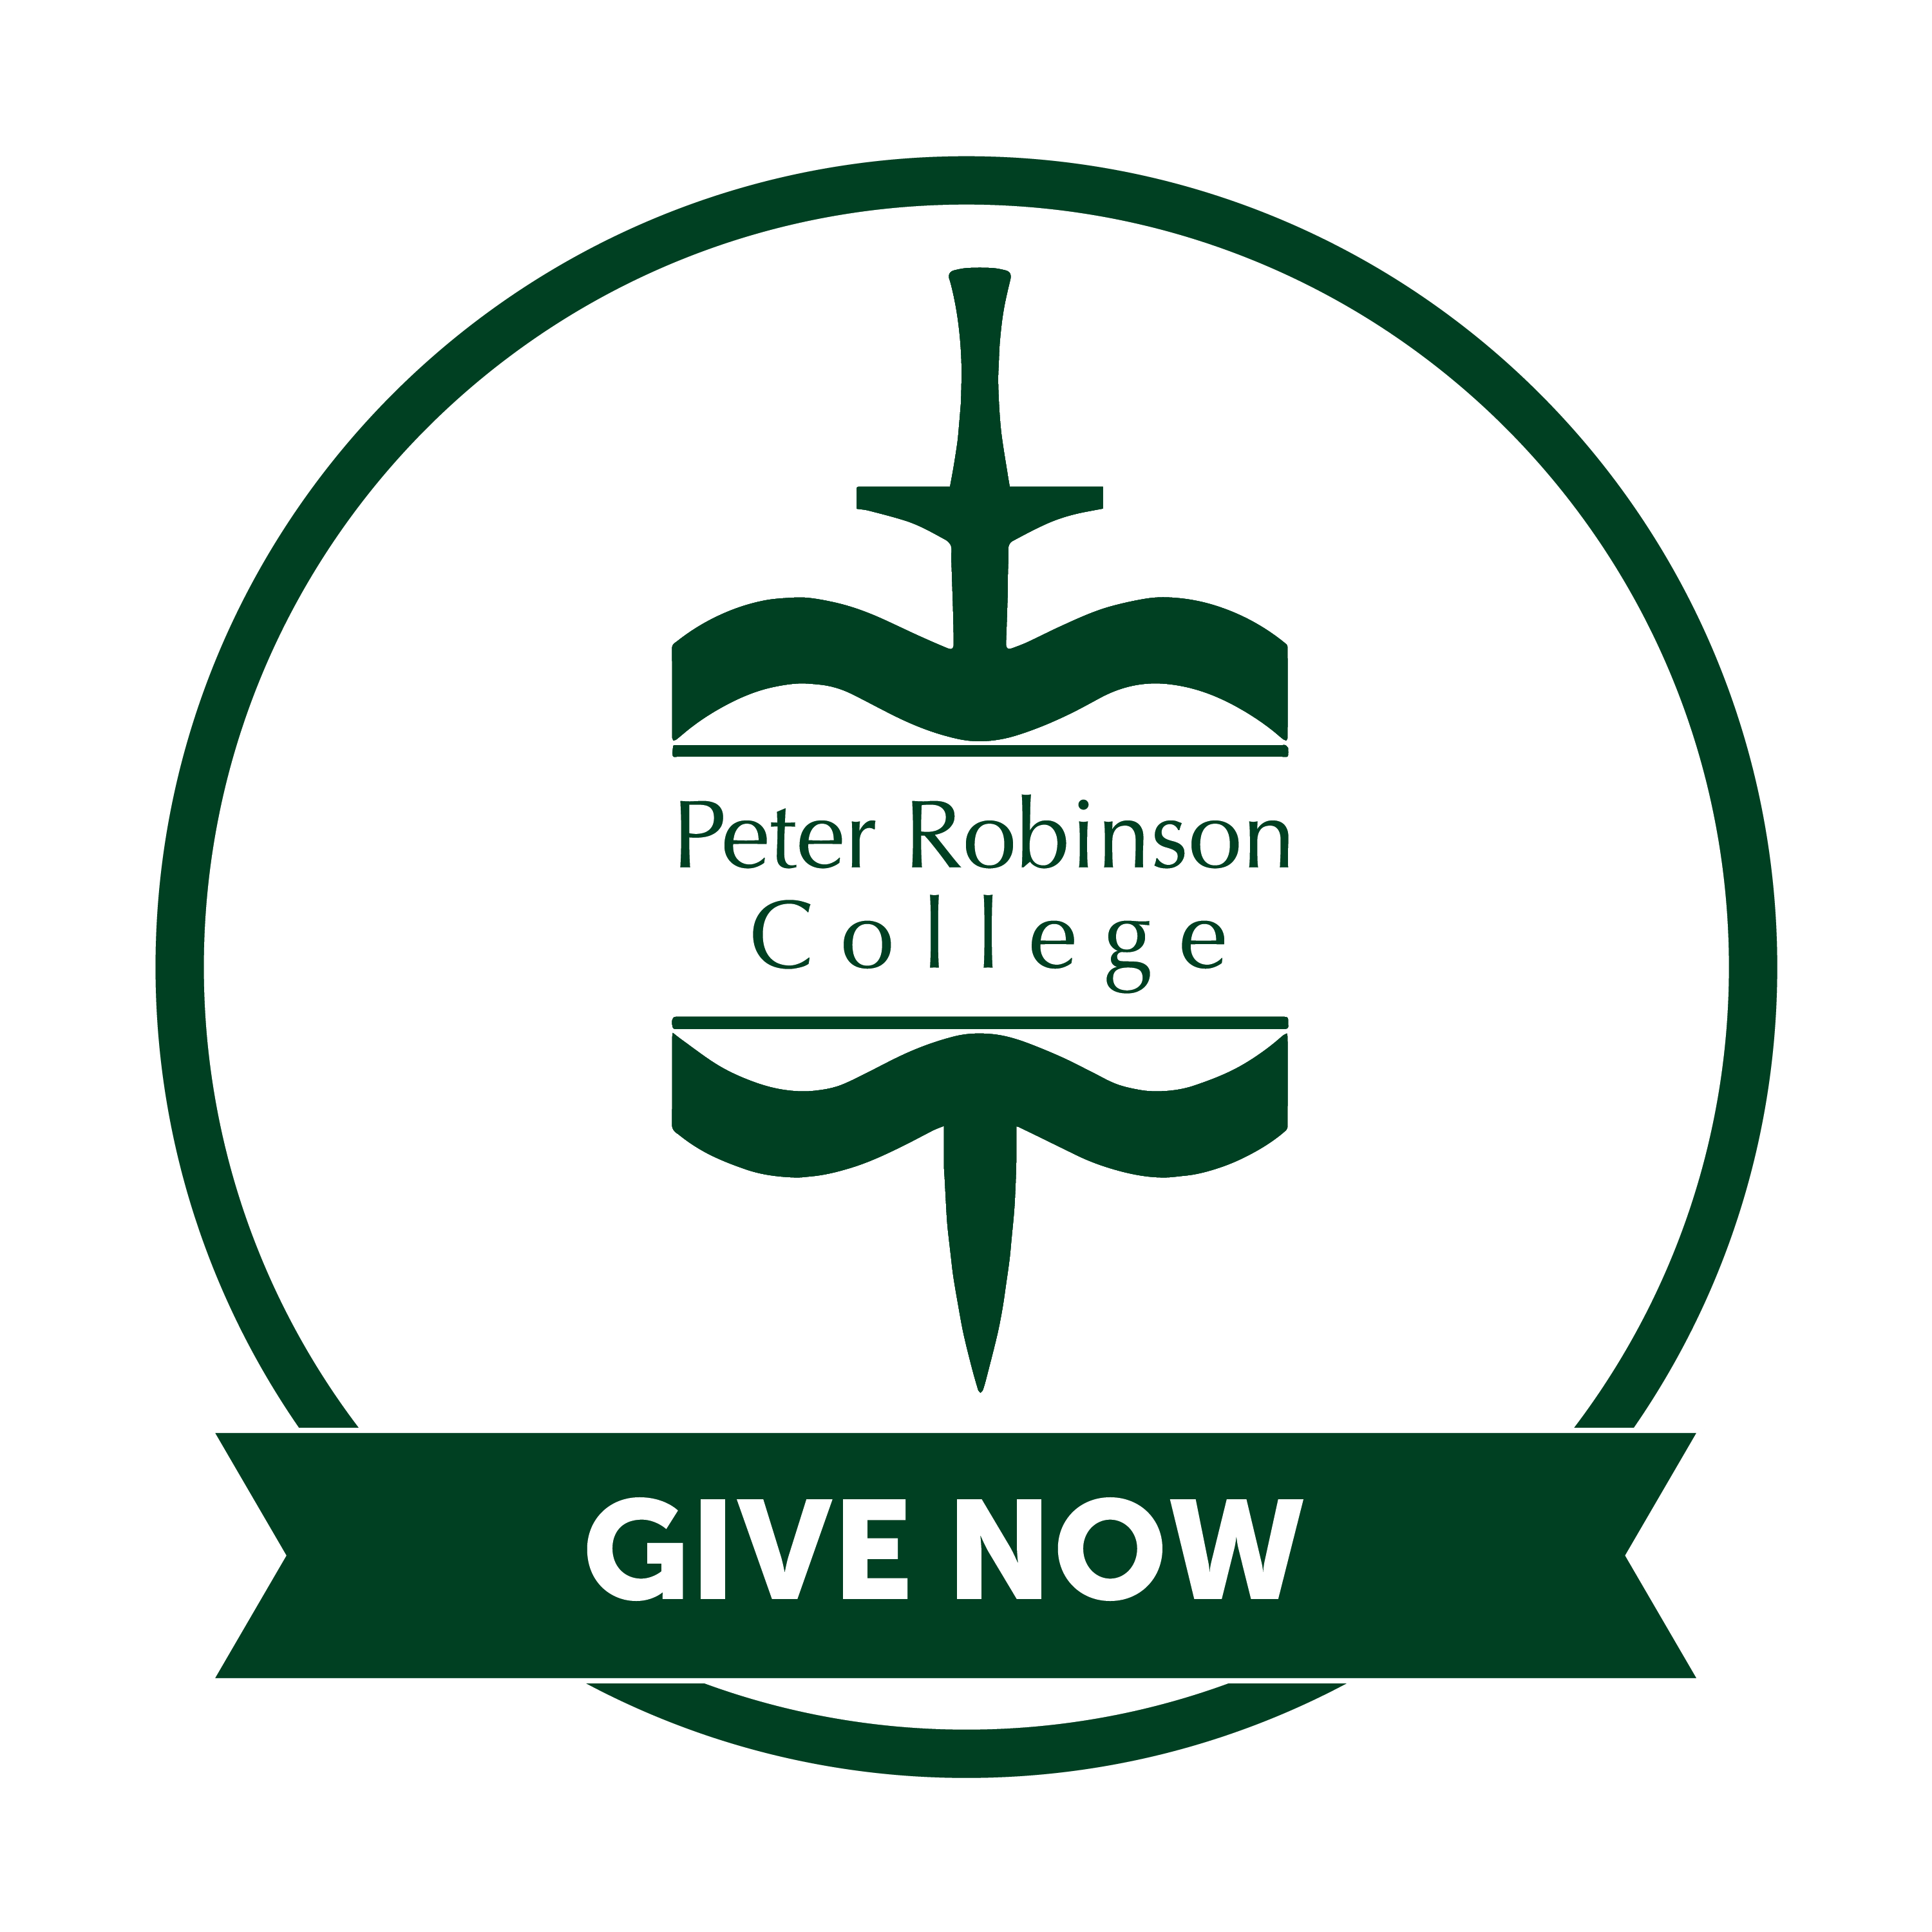 Give now button for PRC